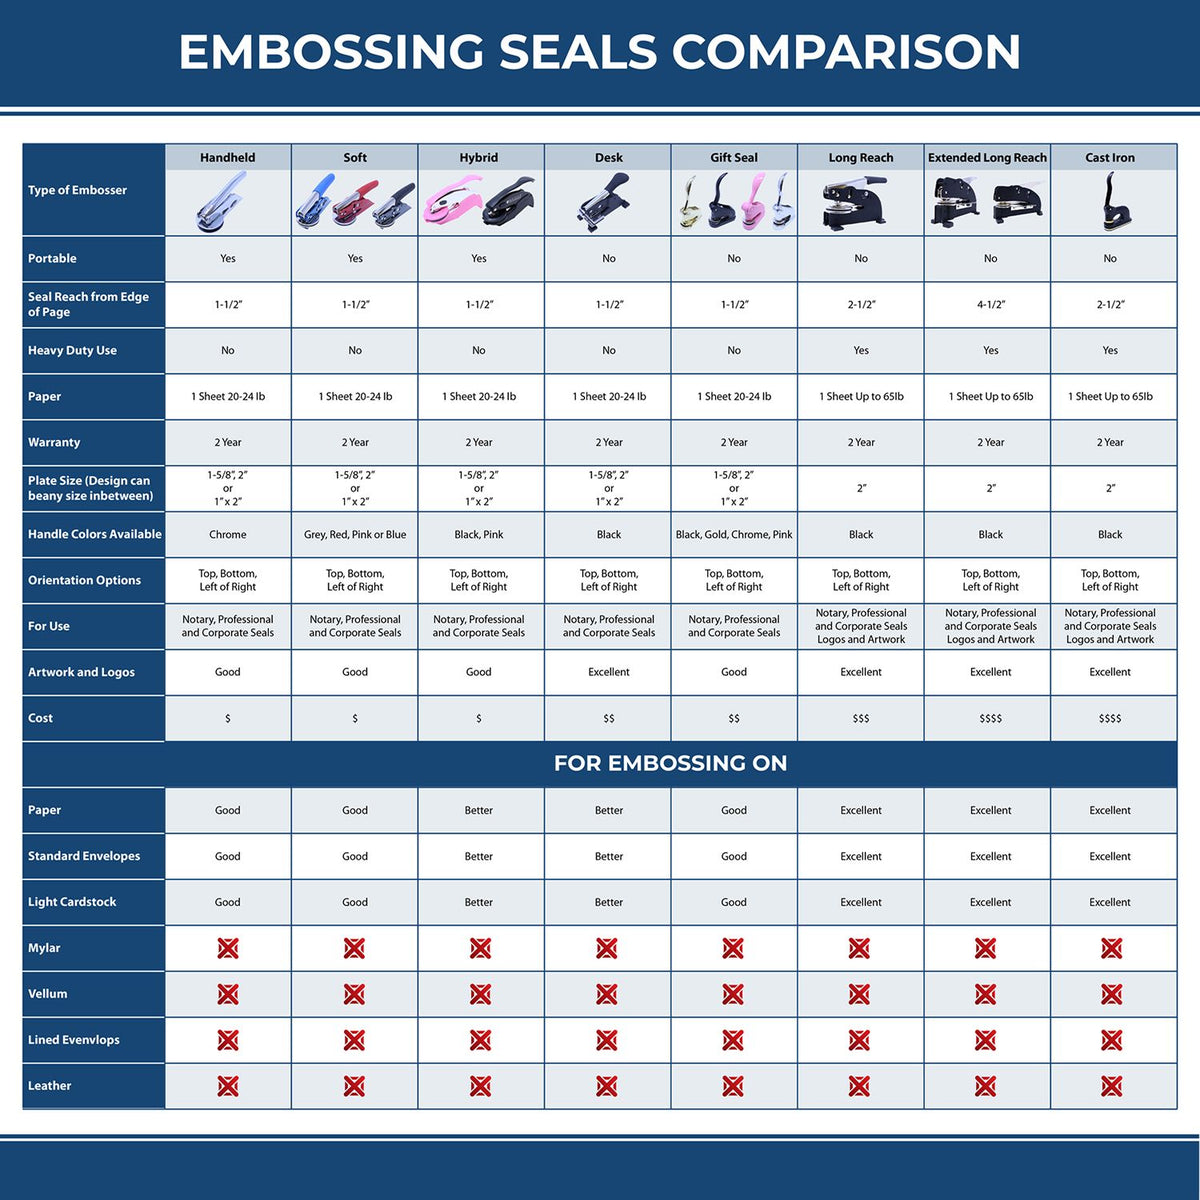 A comparison chart for the different types of mount models available for the Maryland Desk Architect Embossing Seal.